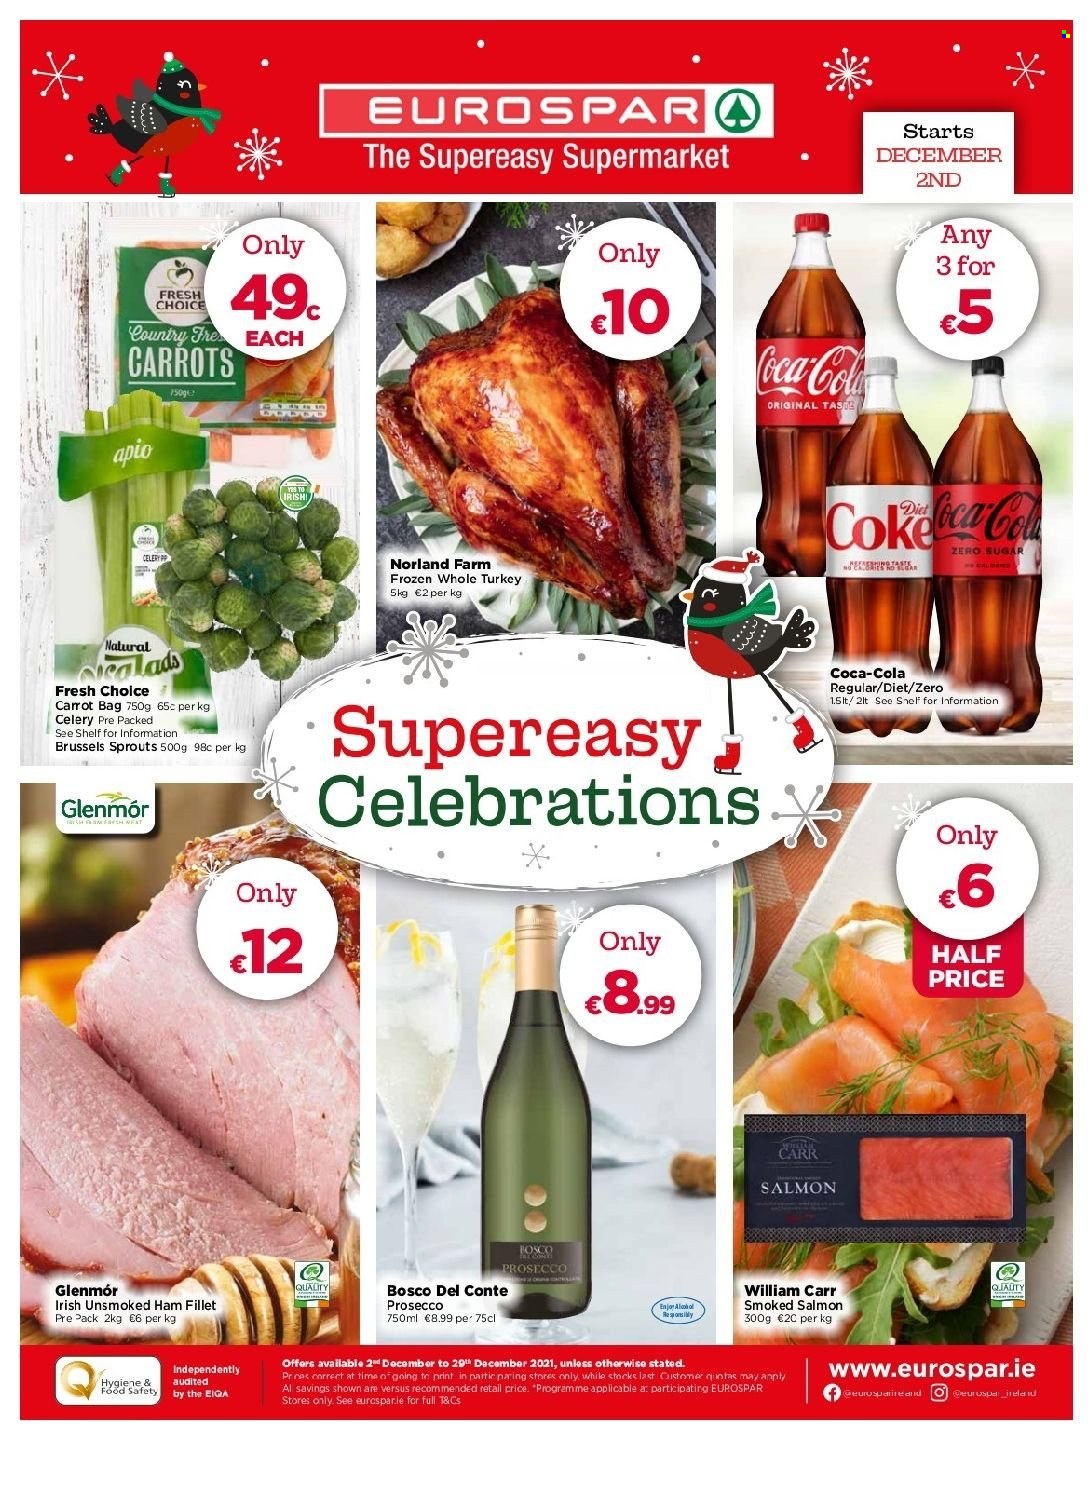 thumbnail - EUROSPAR offer  - 02.12.2021 - 29.12.2021 - Sales products - carrots, celery, brussel sprouts, salmon, smoked salmon, ham, Celebration, Coca-Cola, prosecco, whole turkey, bag. Page 1.